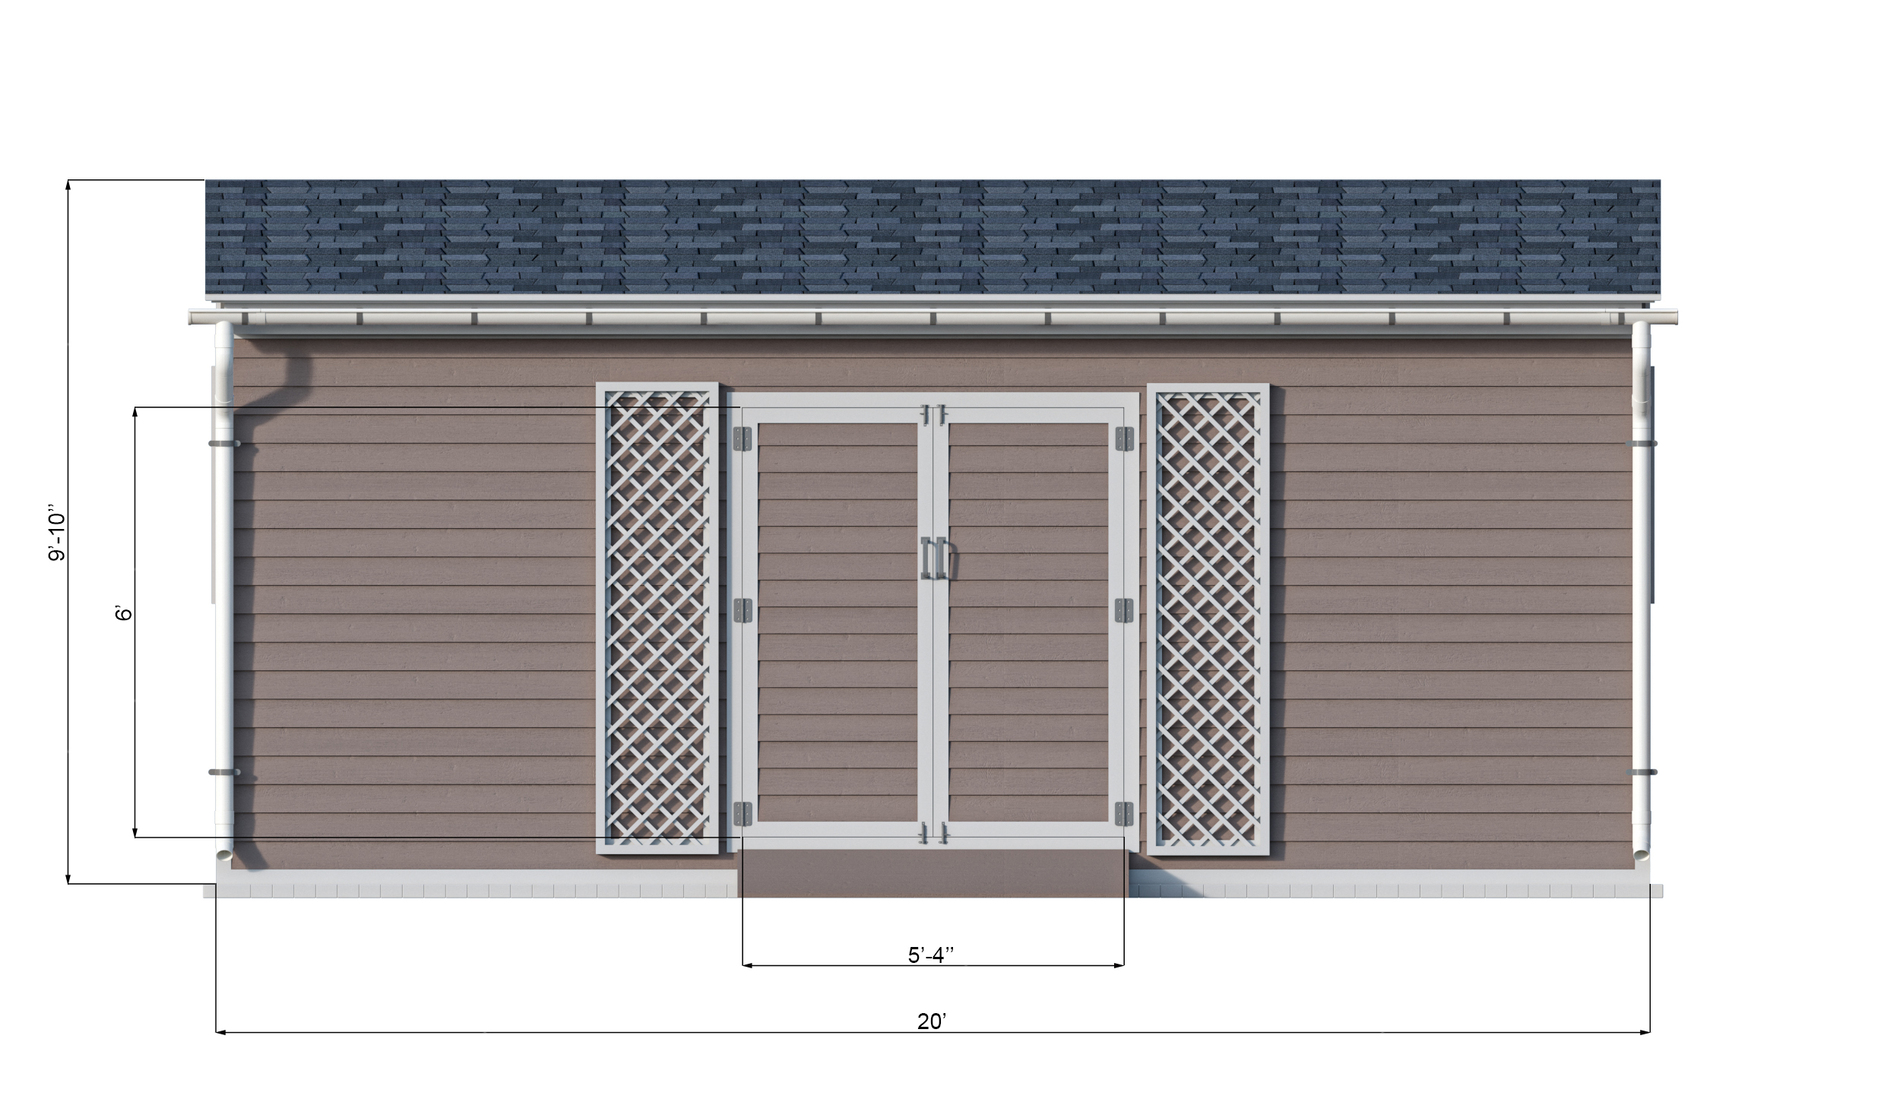 10x20 lean to garden shed front side preview